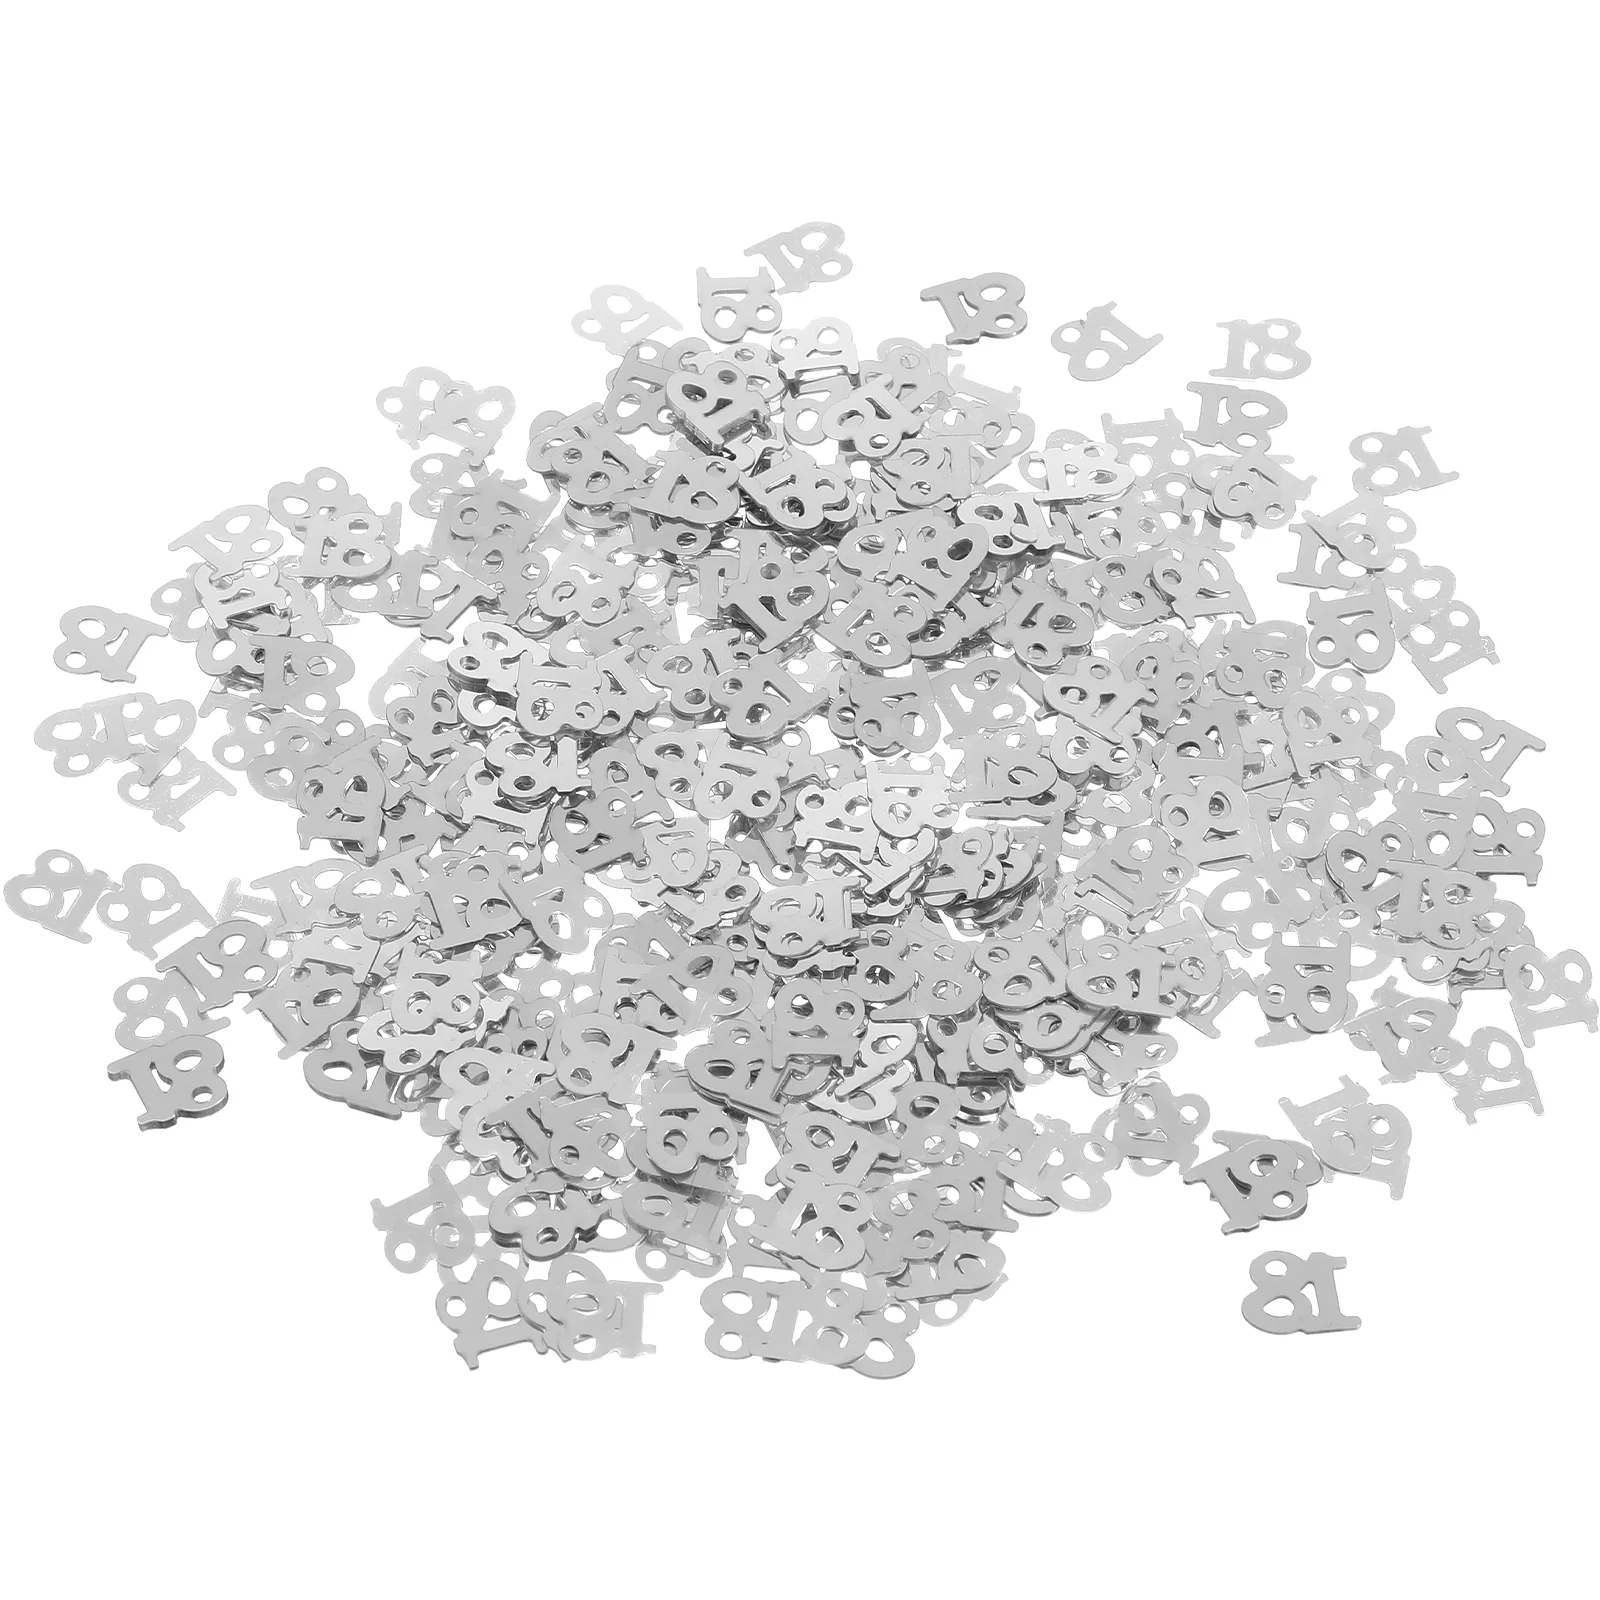 

600PC Monochrome Digital Birthday Confetti Party Happy Throwing Sequins Age 18 for Festival Party Decoration (Silver)